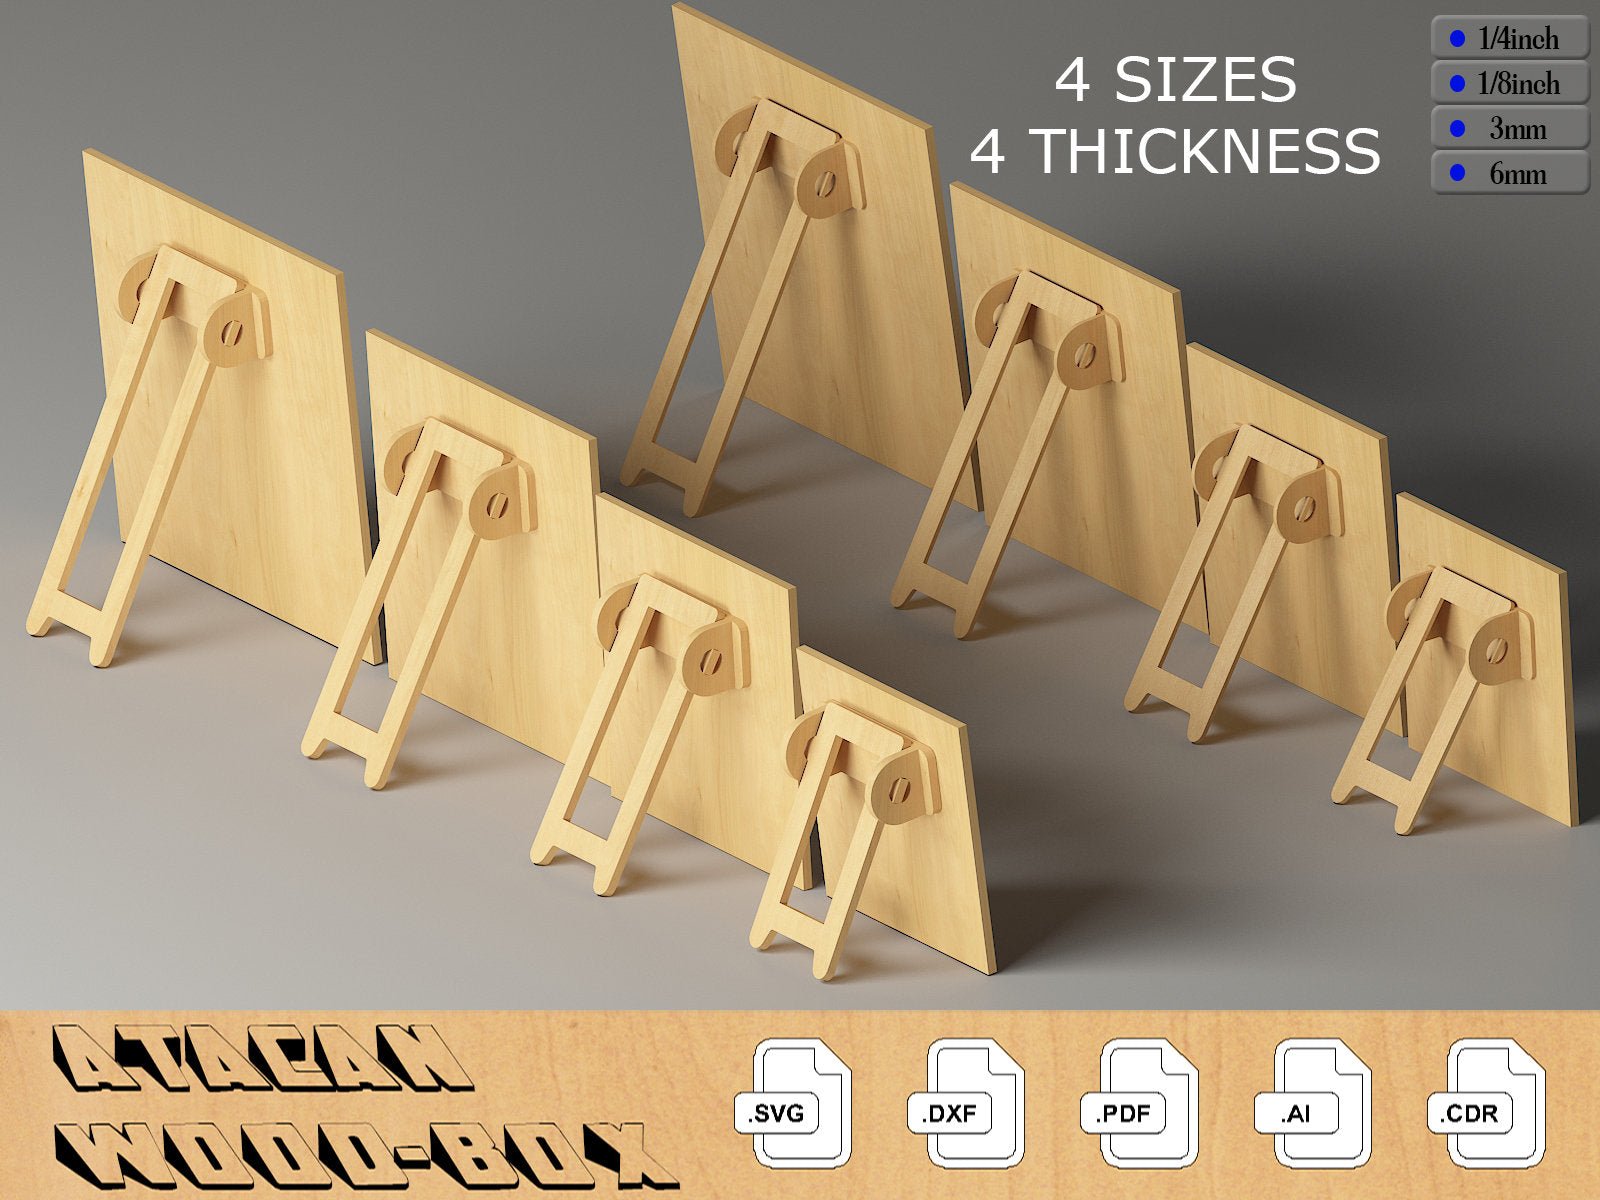 Legs for photo frames / Various Sizes for different frames / Easel Stand Backs / Glowforge Frame / Laser Cut wood picture frame 302